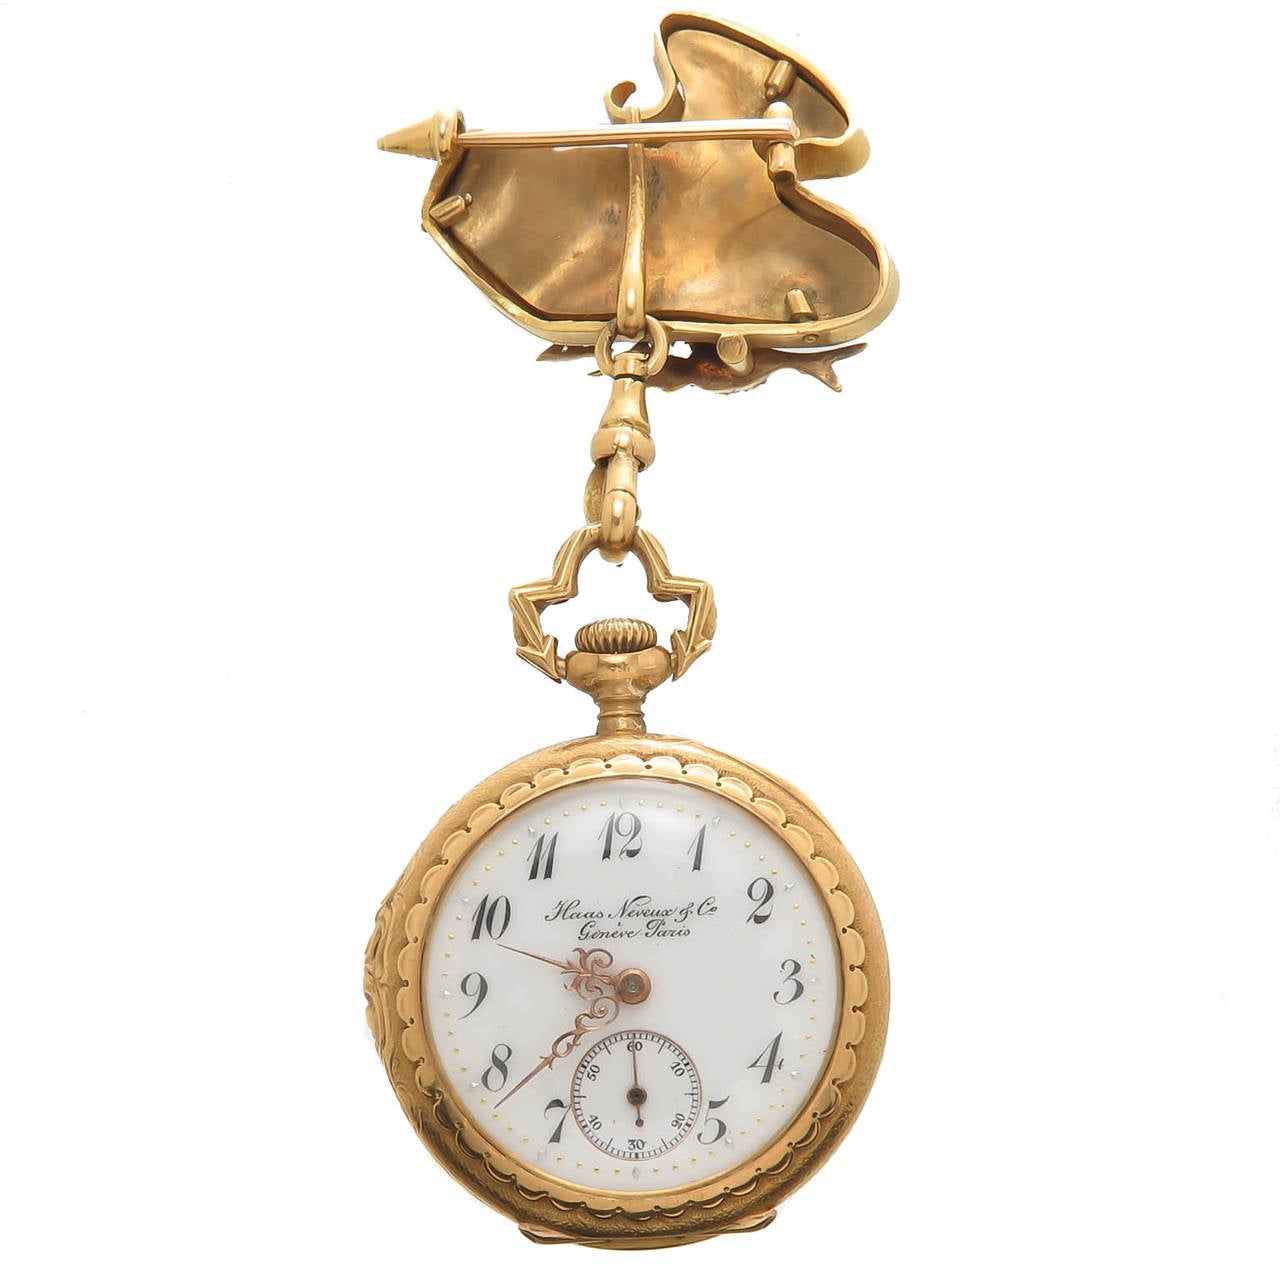 Circa 1910 very fine, Museum Quality Enamel and Gem set Lapel Watch by Haas Neveux. 18K Yellow Gold with Fine enamel, gold chasing and accented with numerous Rose cut Diamonds. Stem set Jeweled Nickel lever movement. Porcelain Dial with sunk seconds